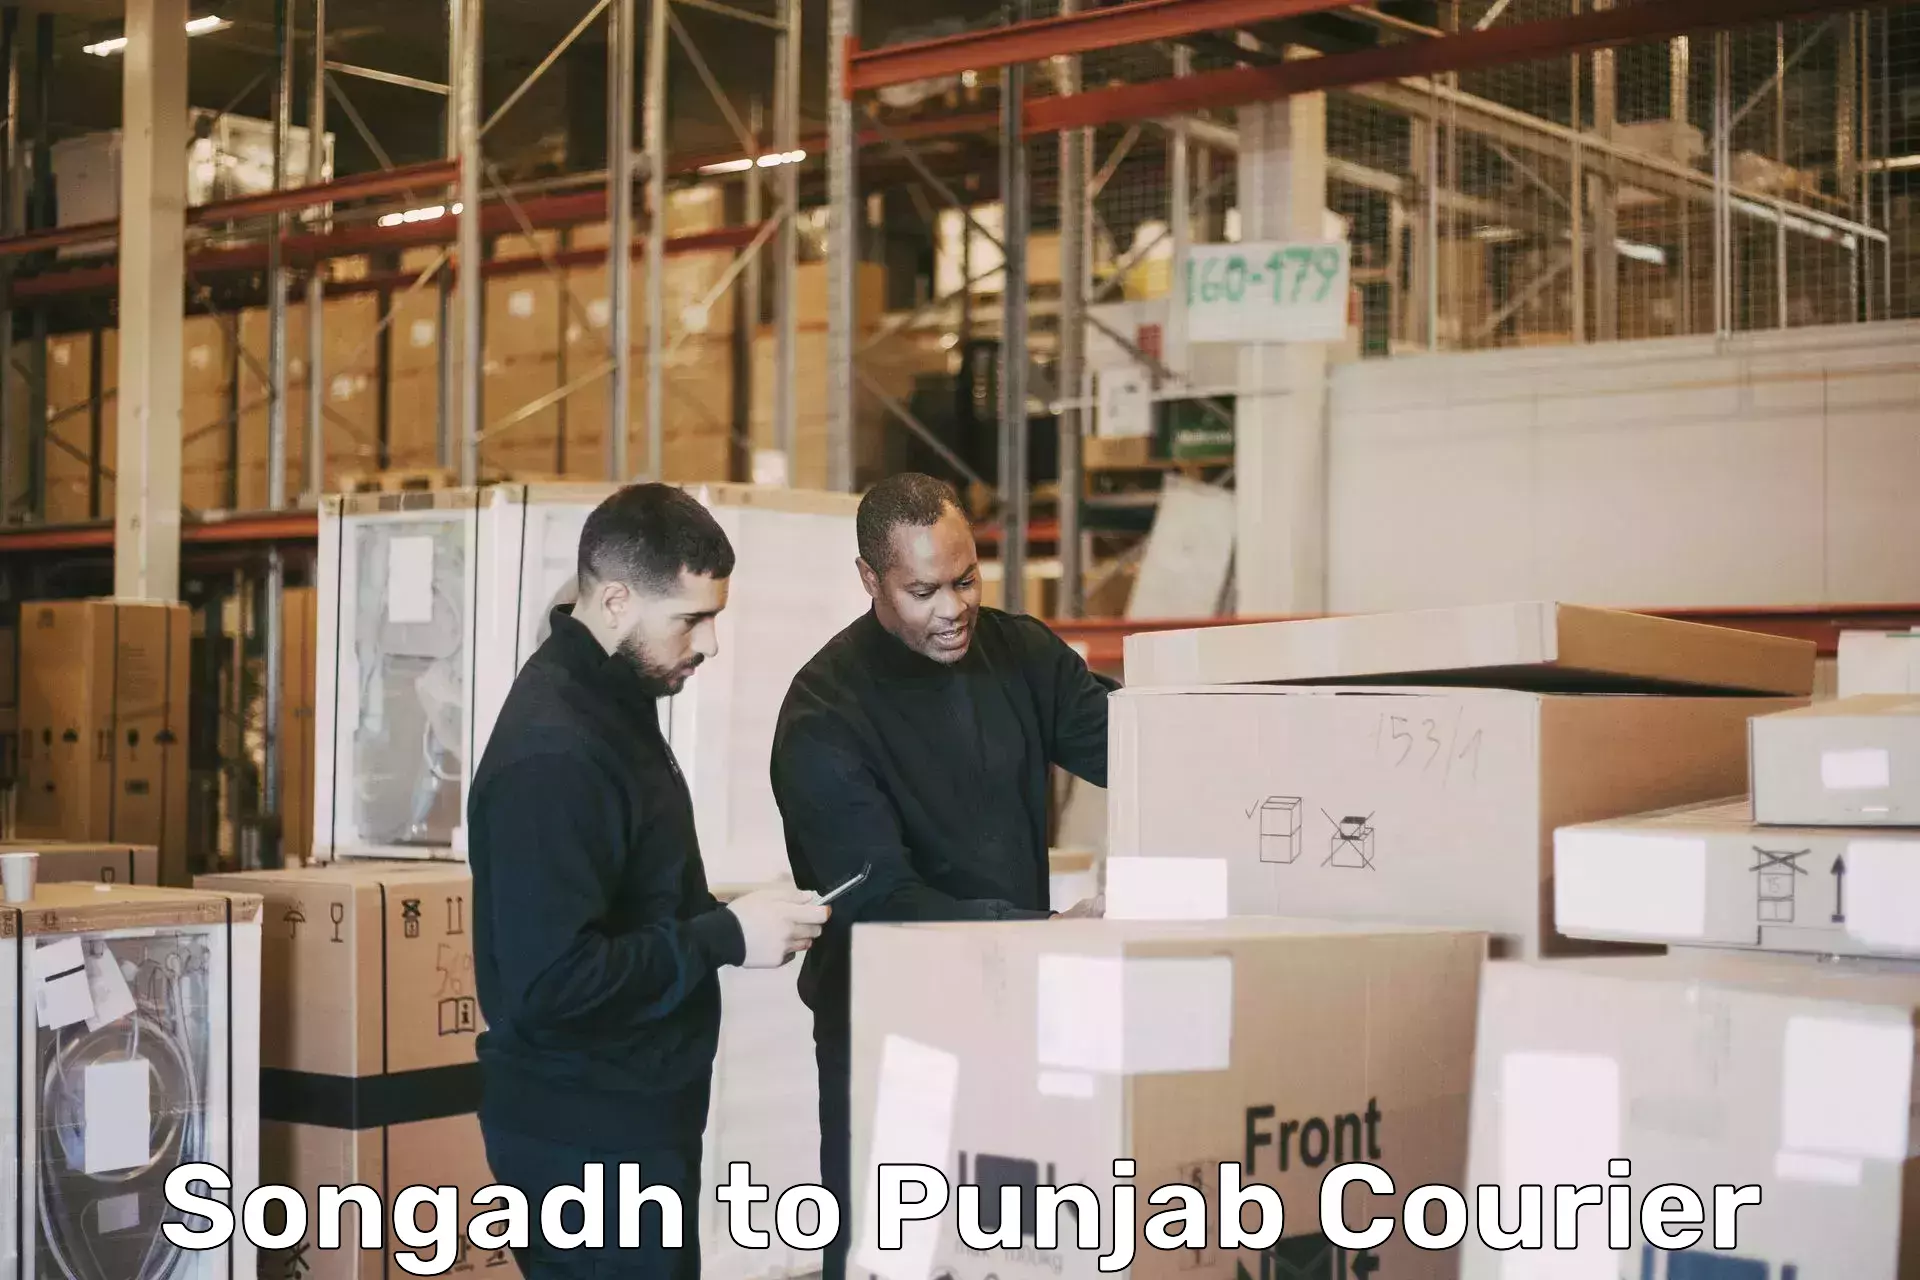 Household moving experts Songadh to Punjab